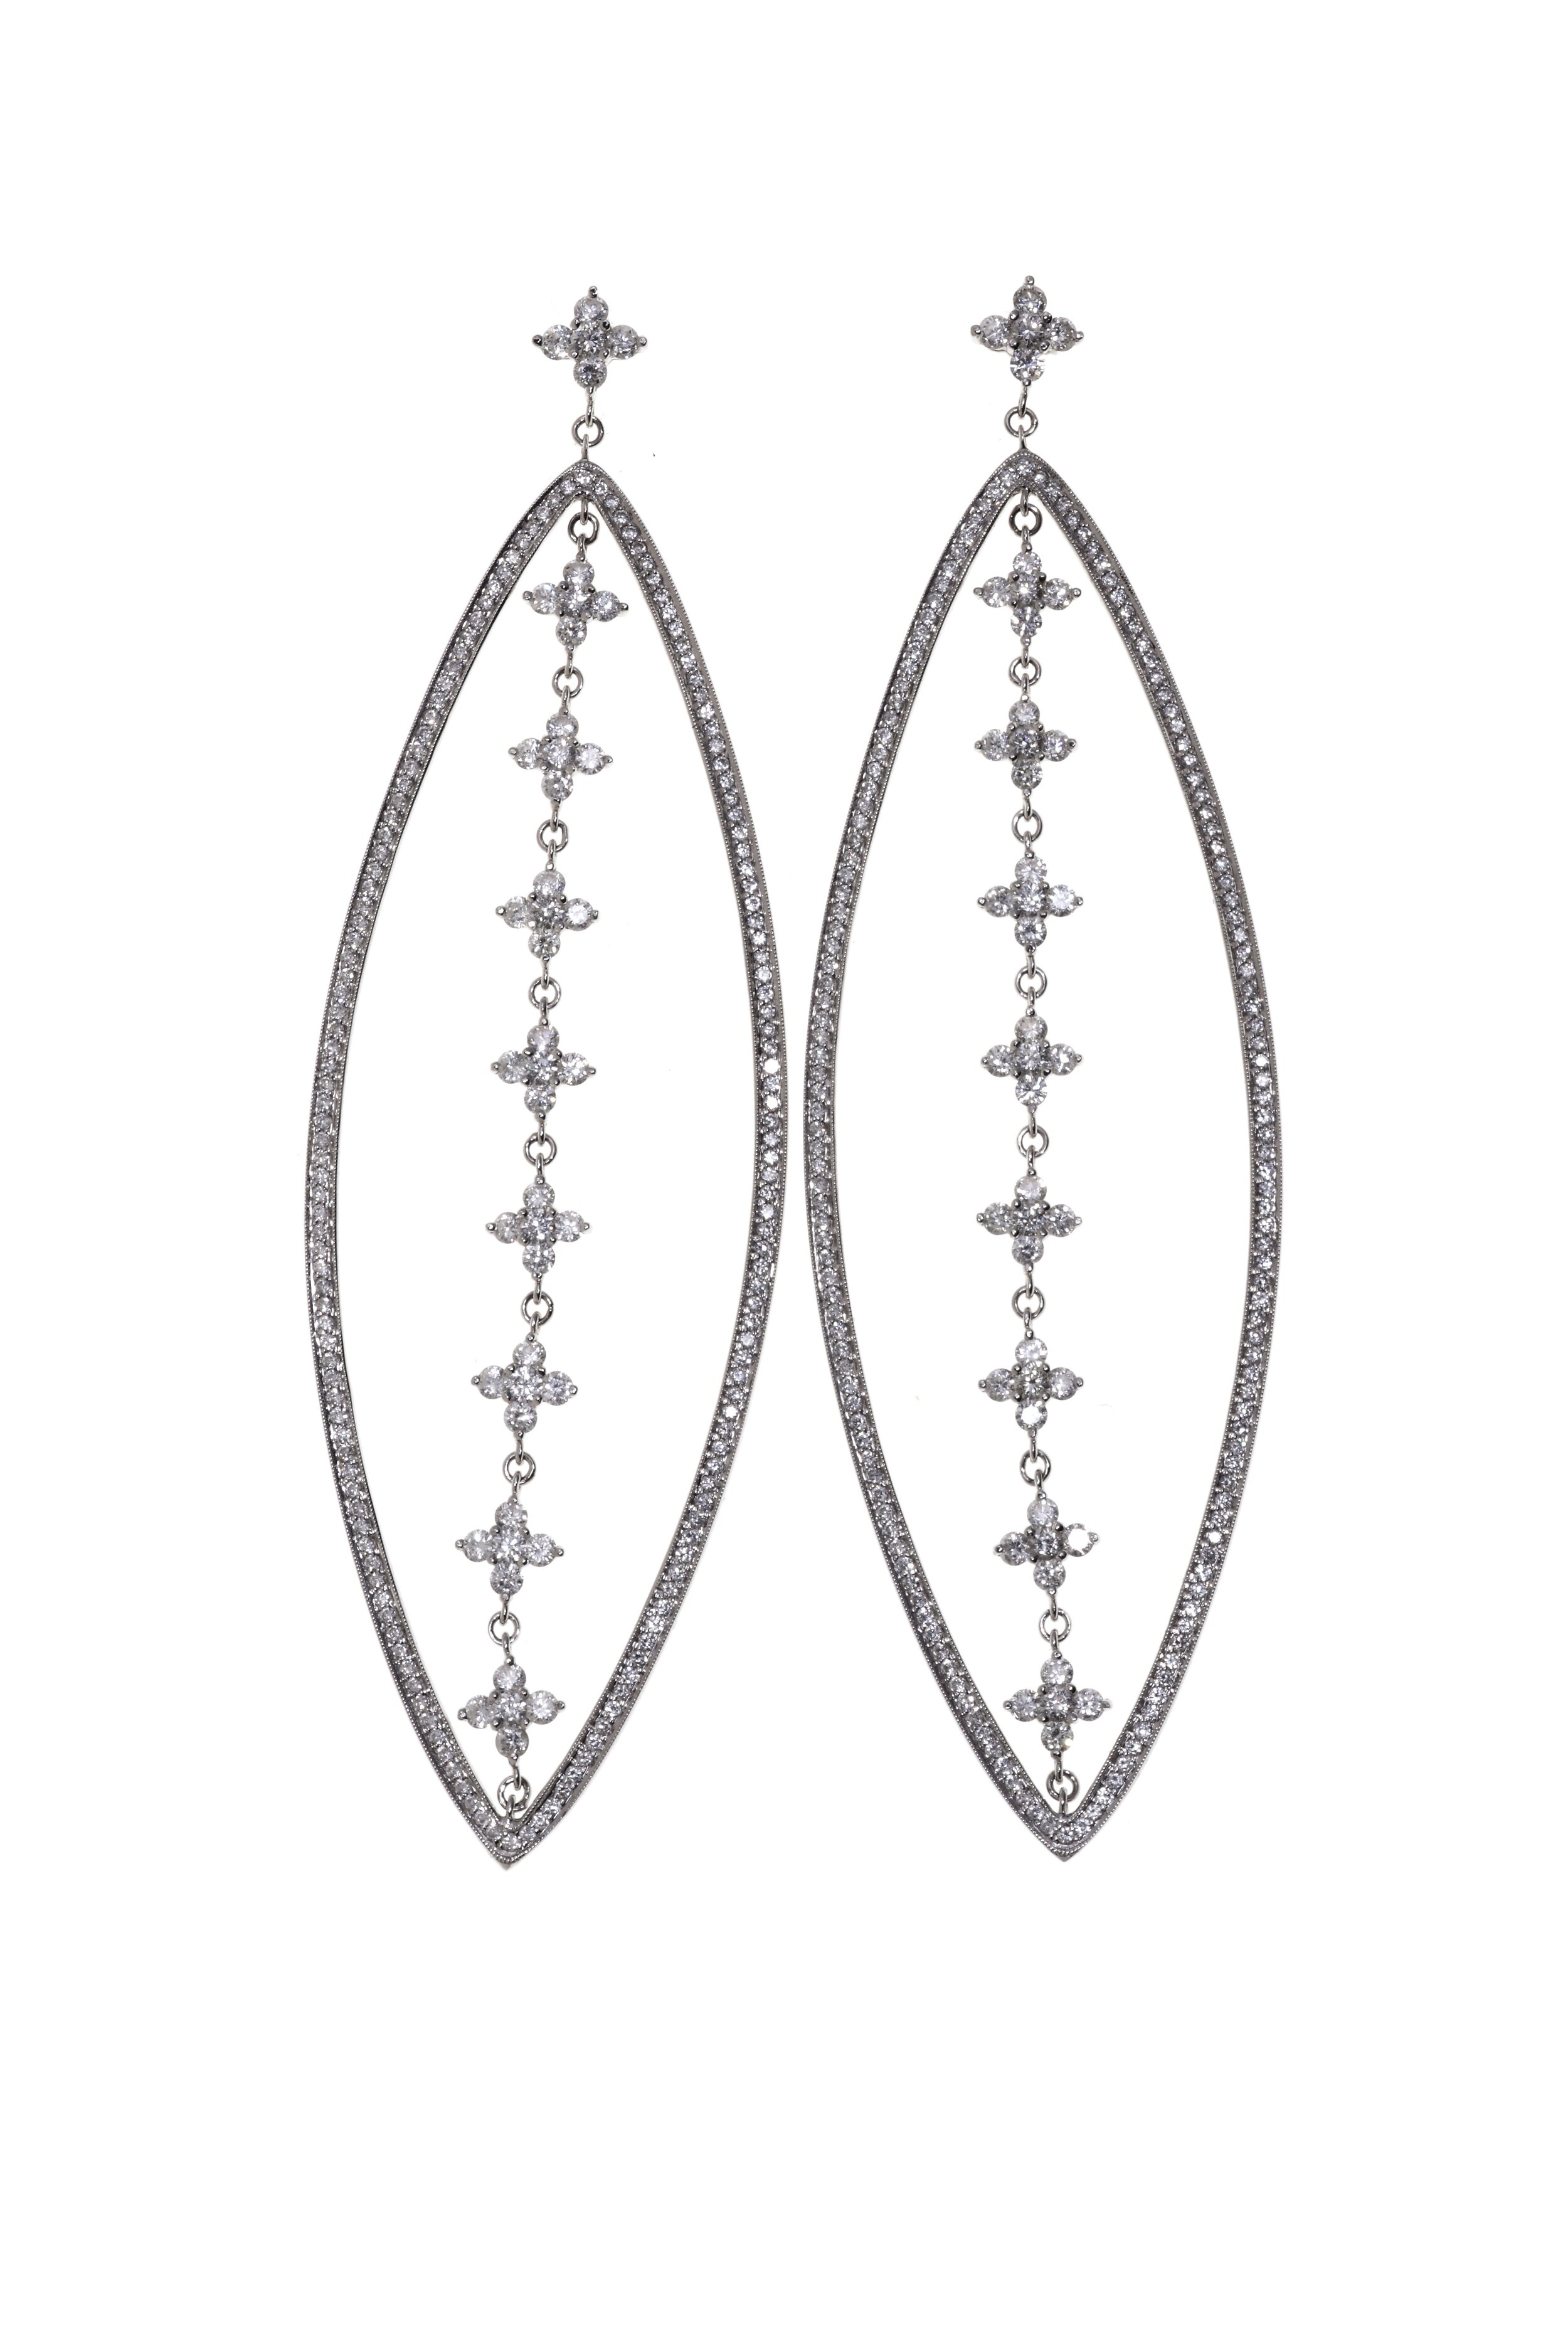 2011_NYR_02629_1373_000(a_pair_of_diamond_and_white_gold_ear_pendants).jpg